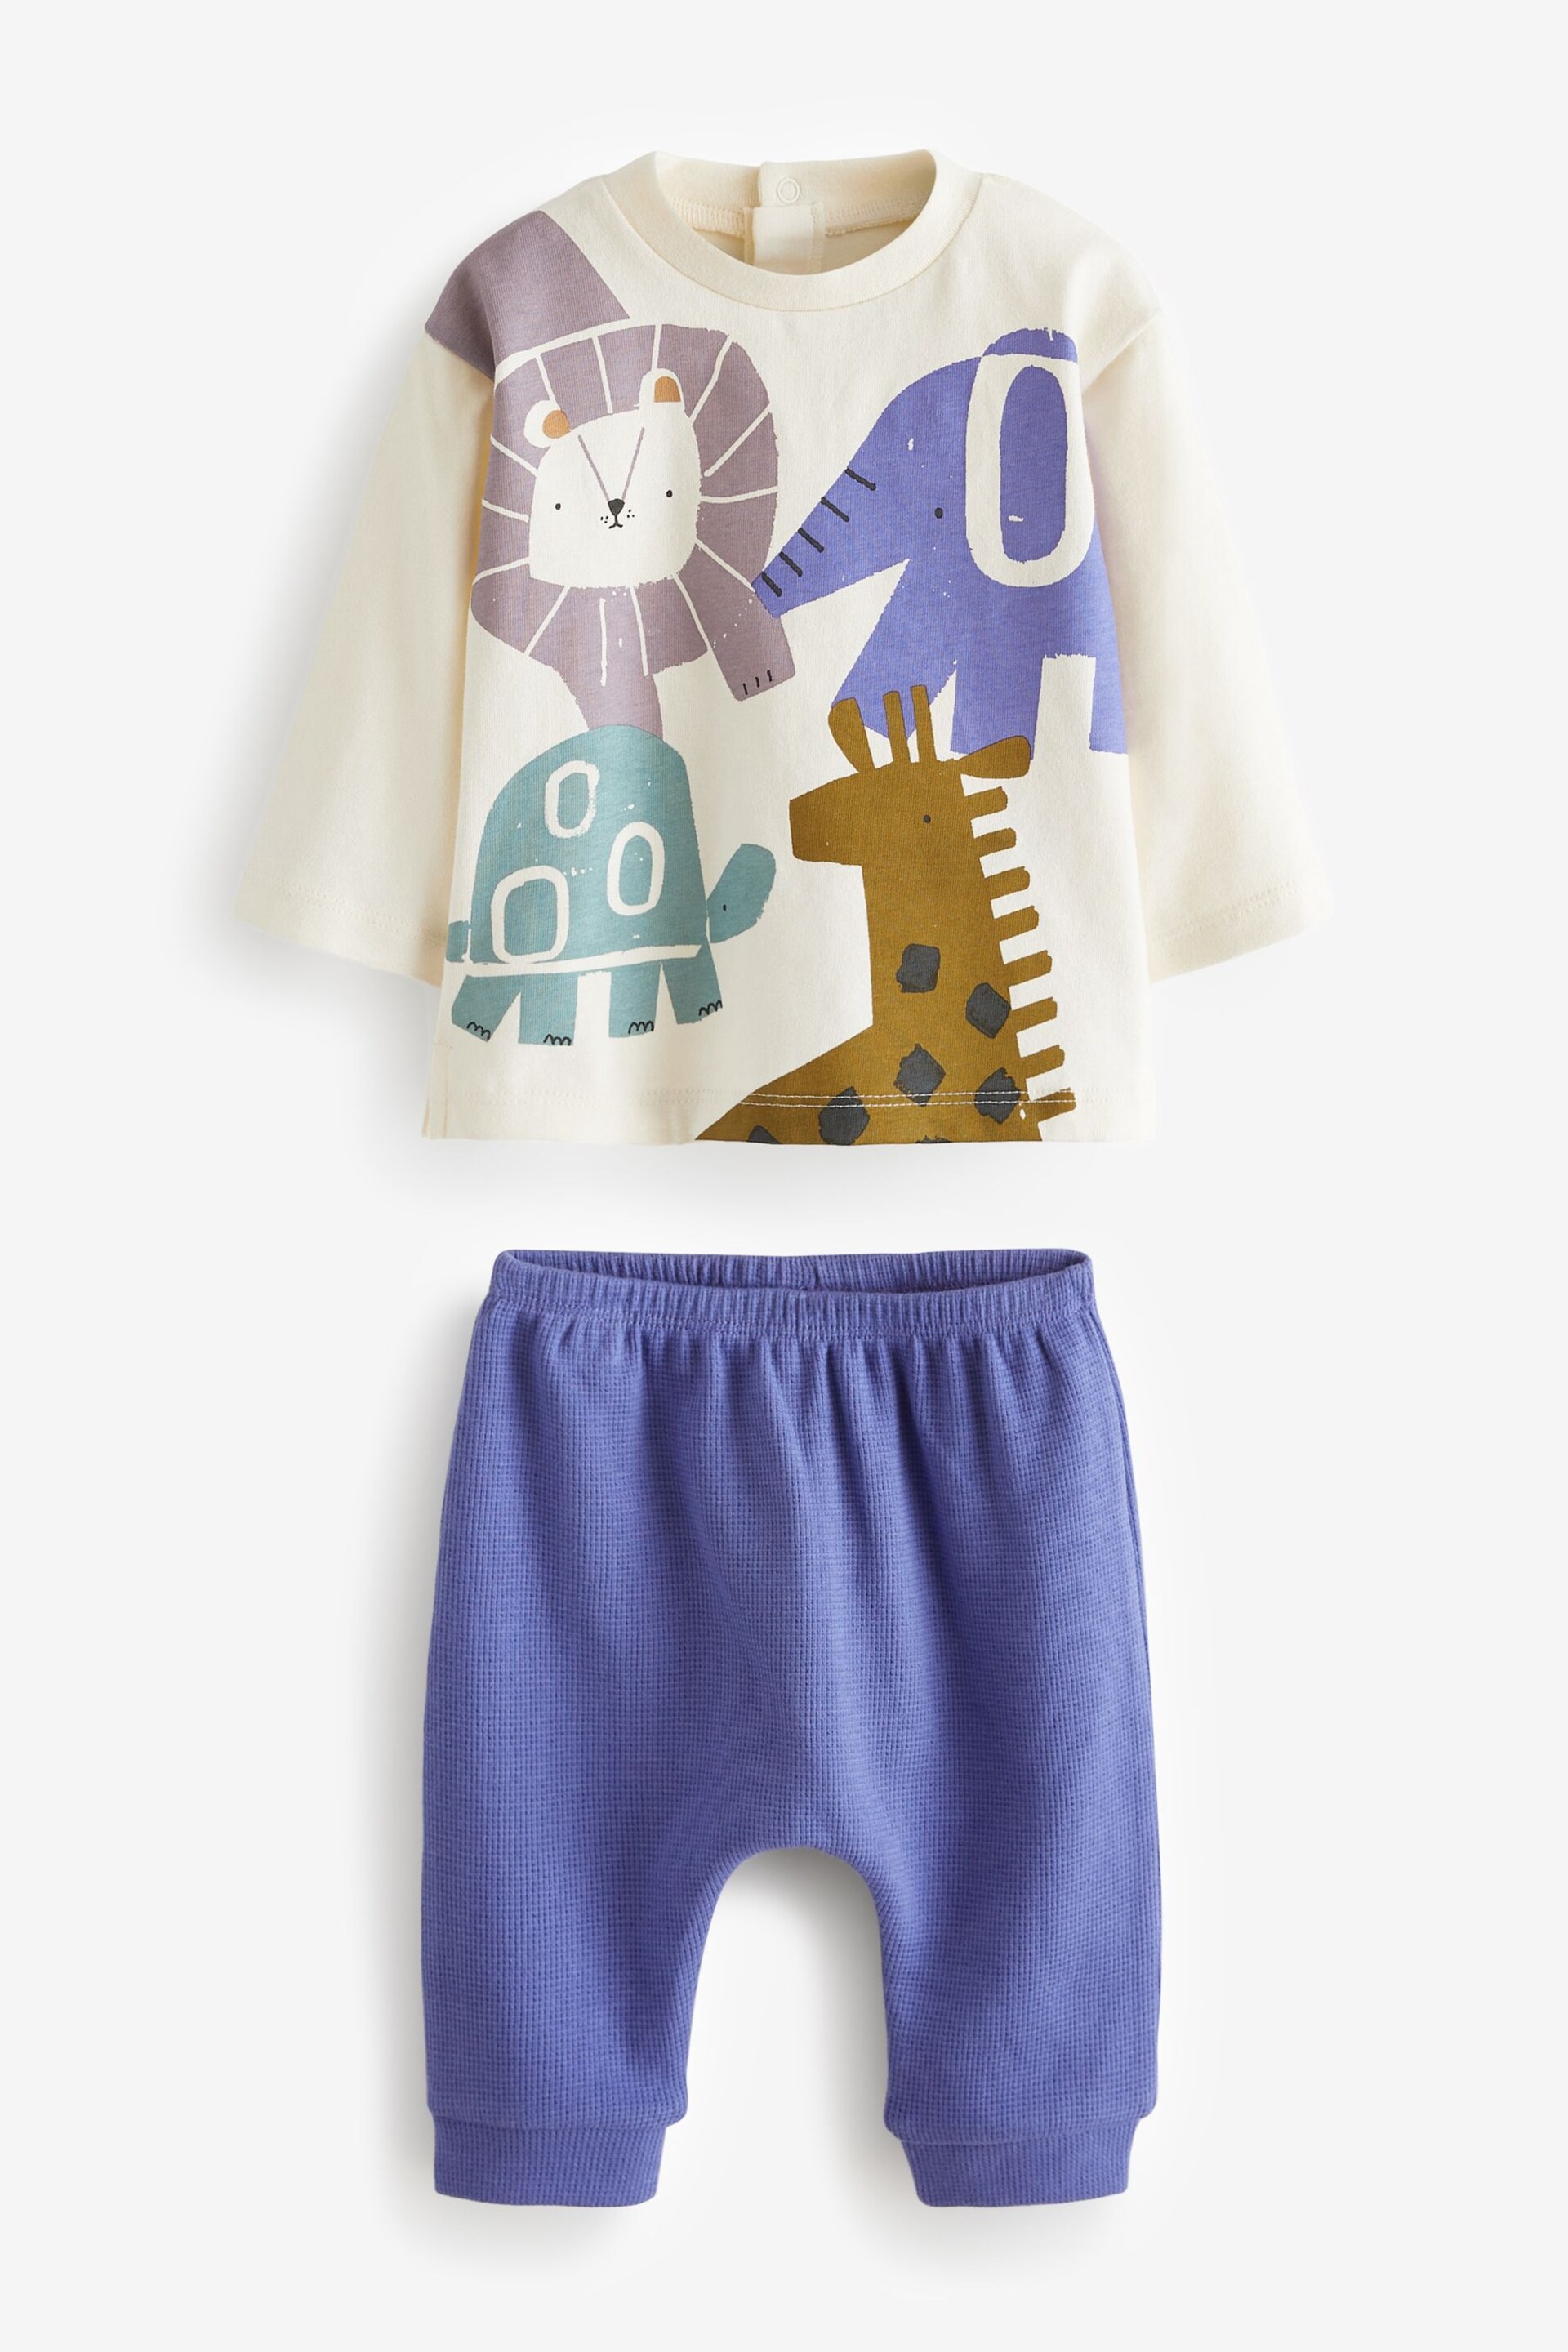 White/Cobalt Blue Safari Character Baby Top and Leggings 2 Piece Set - Image 4 of 5